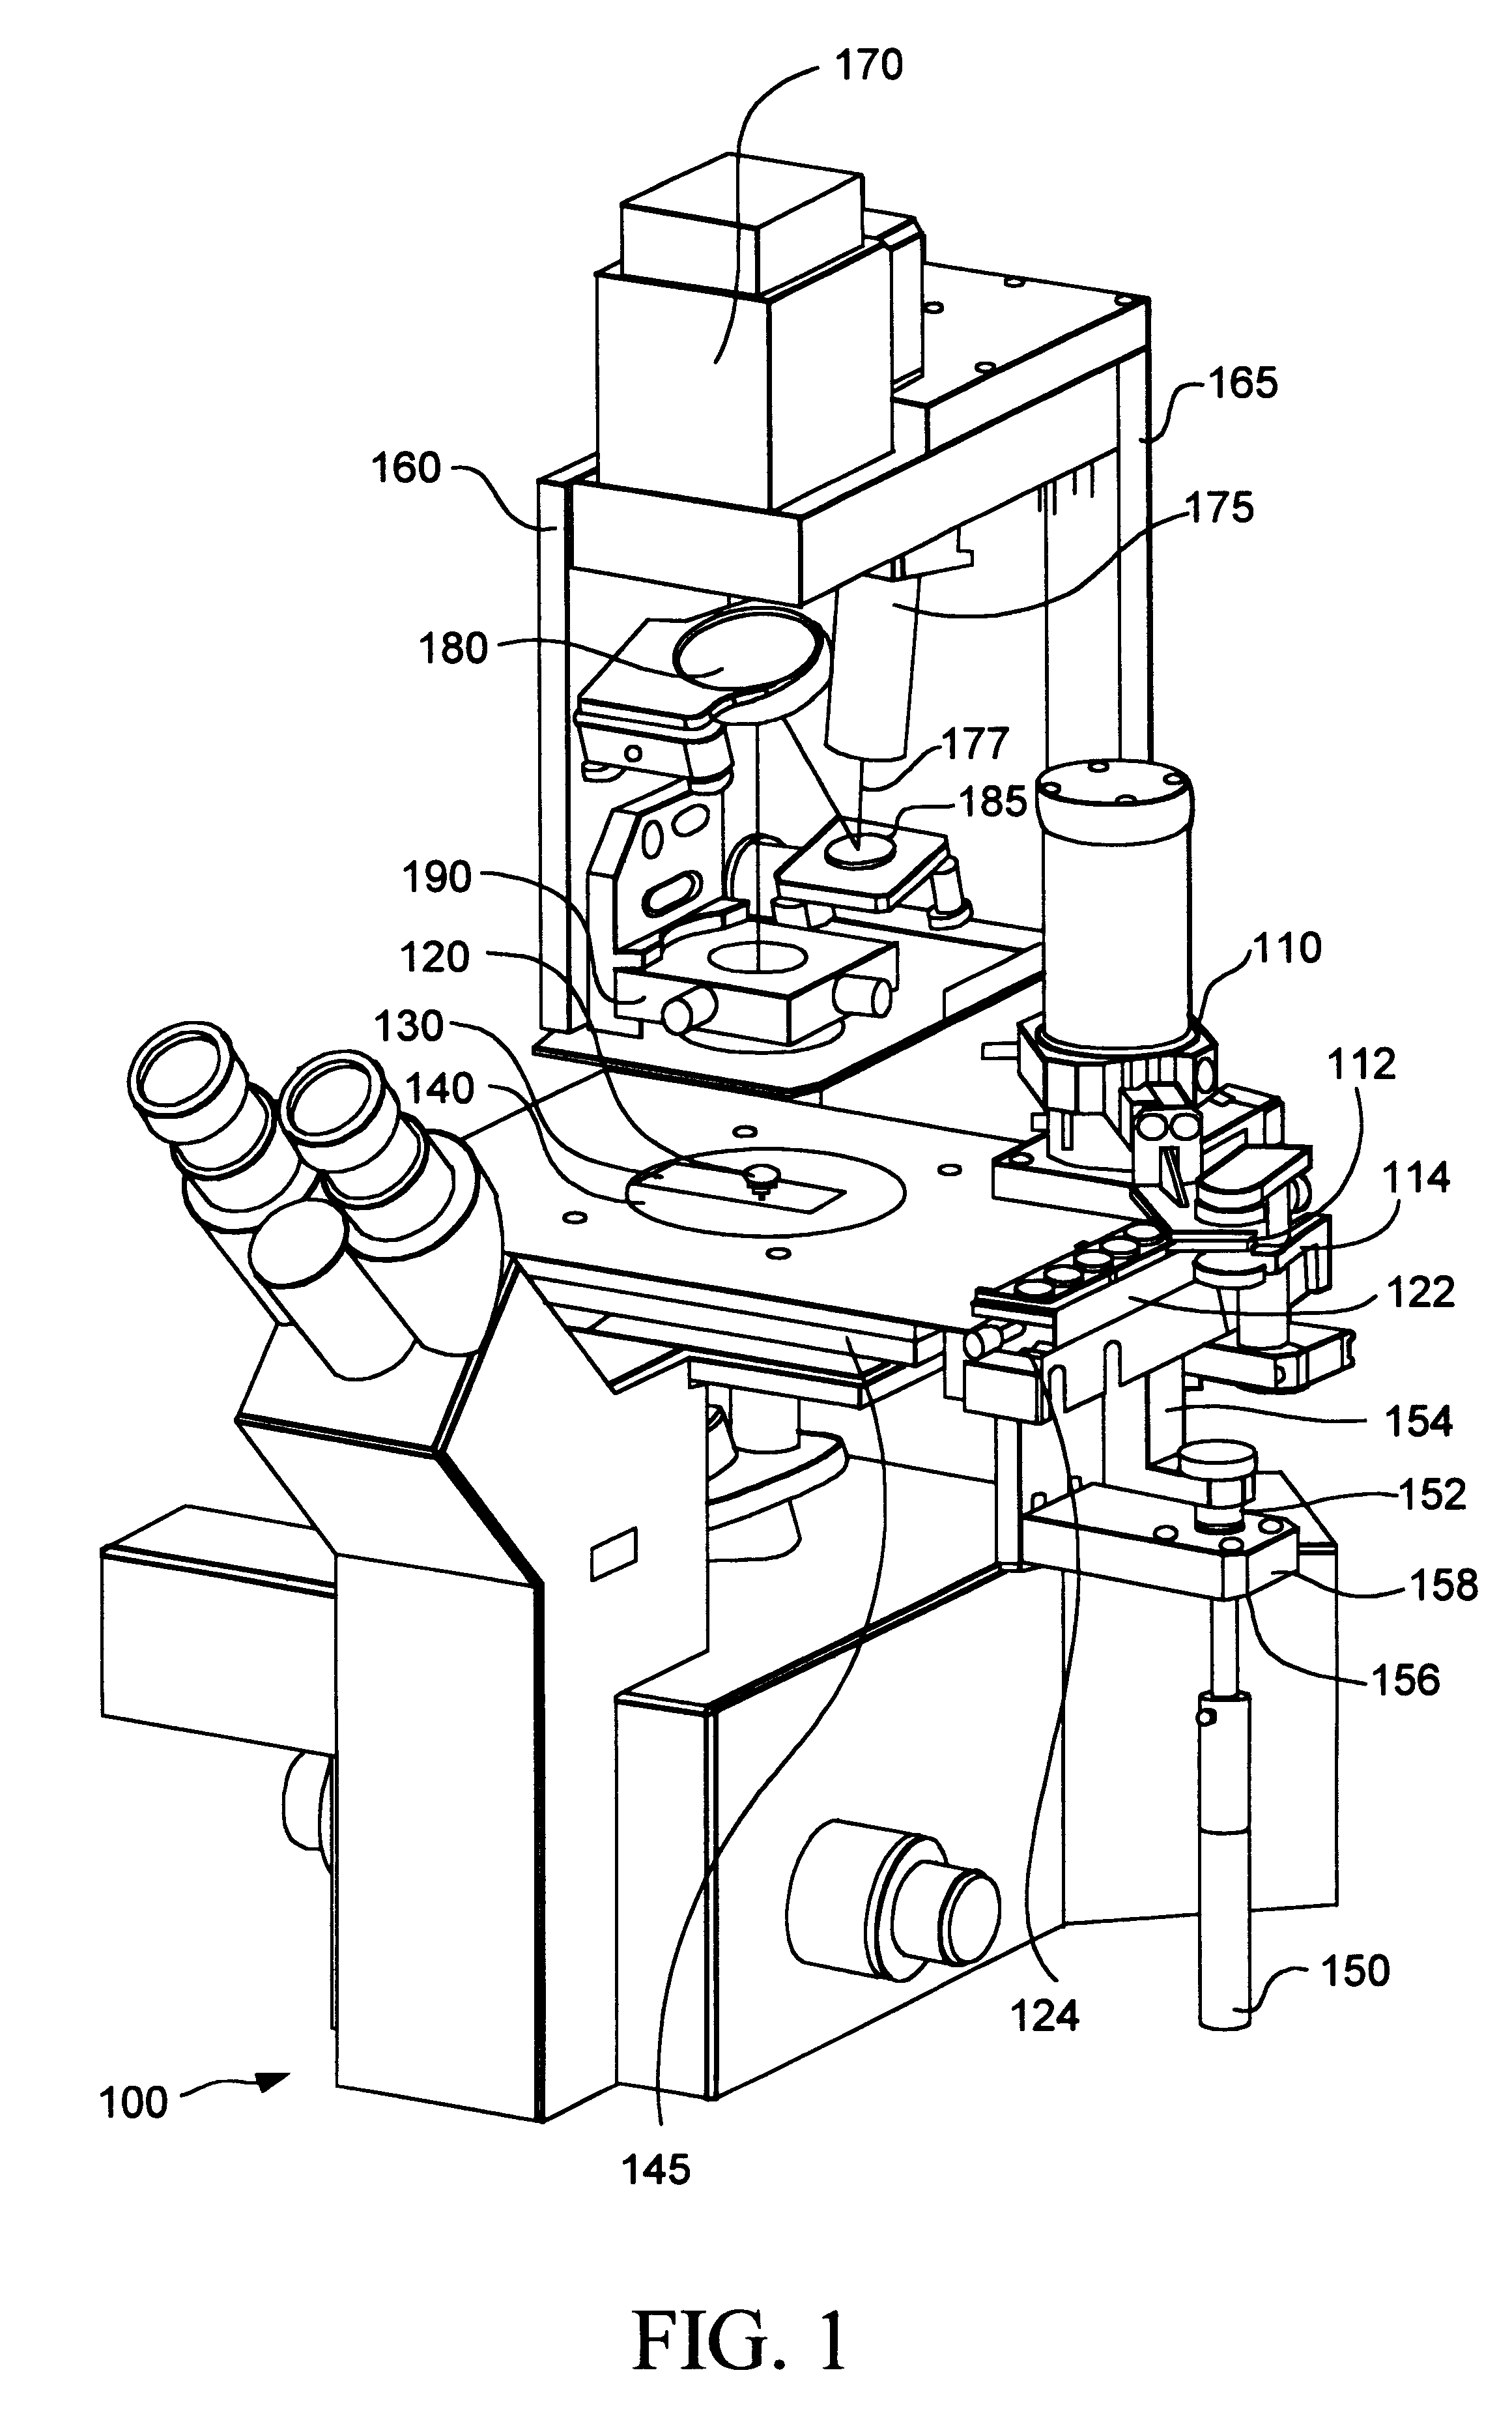 Laser capture microdissection optical system